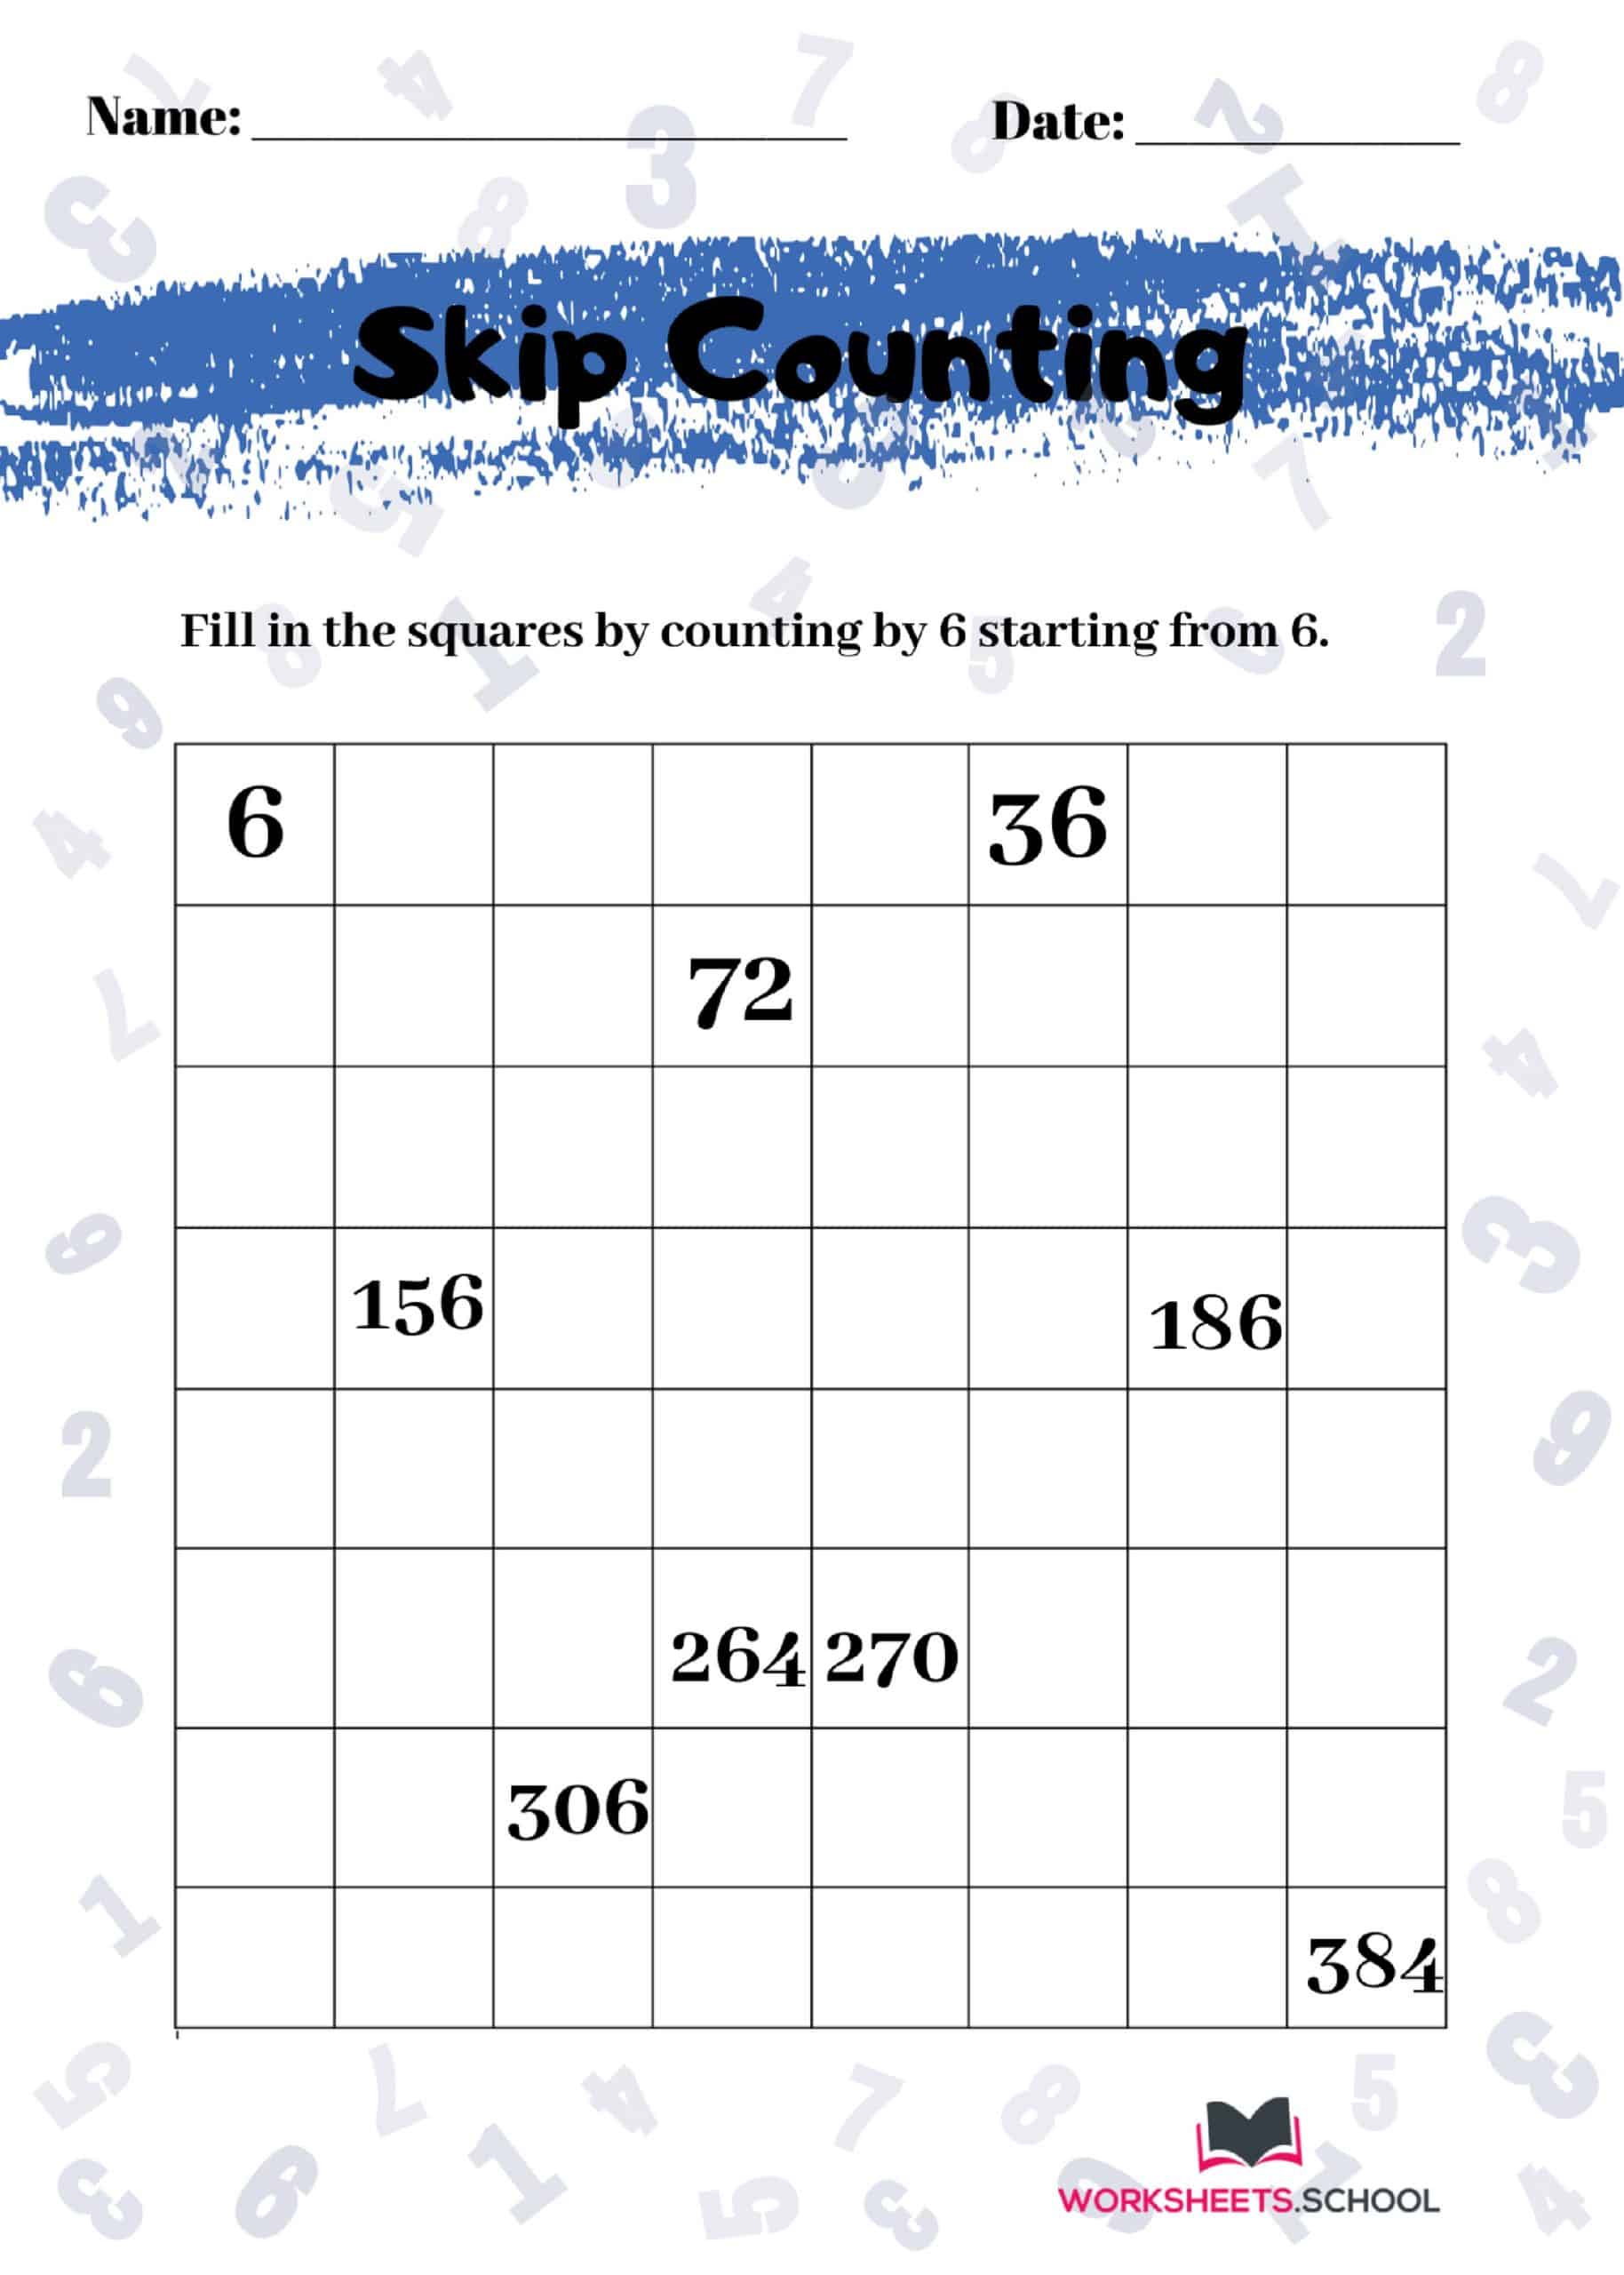 Skip Counting Worksheet by 6